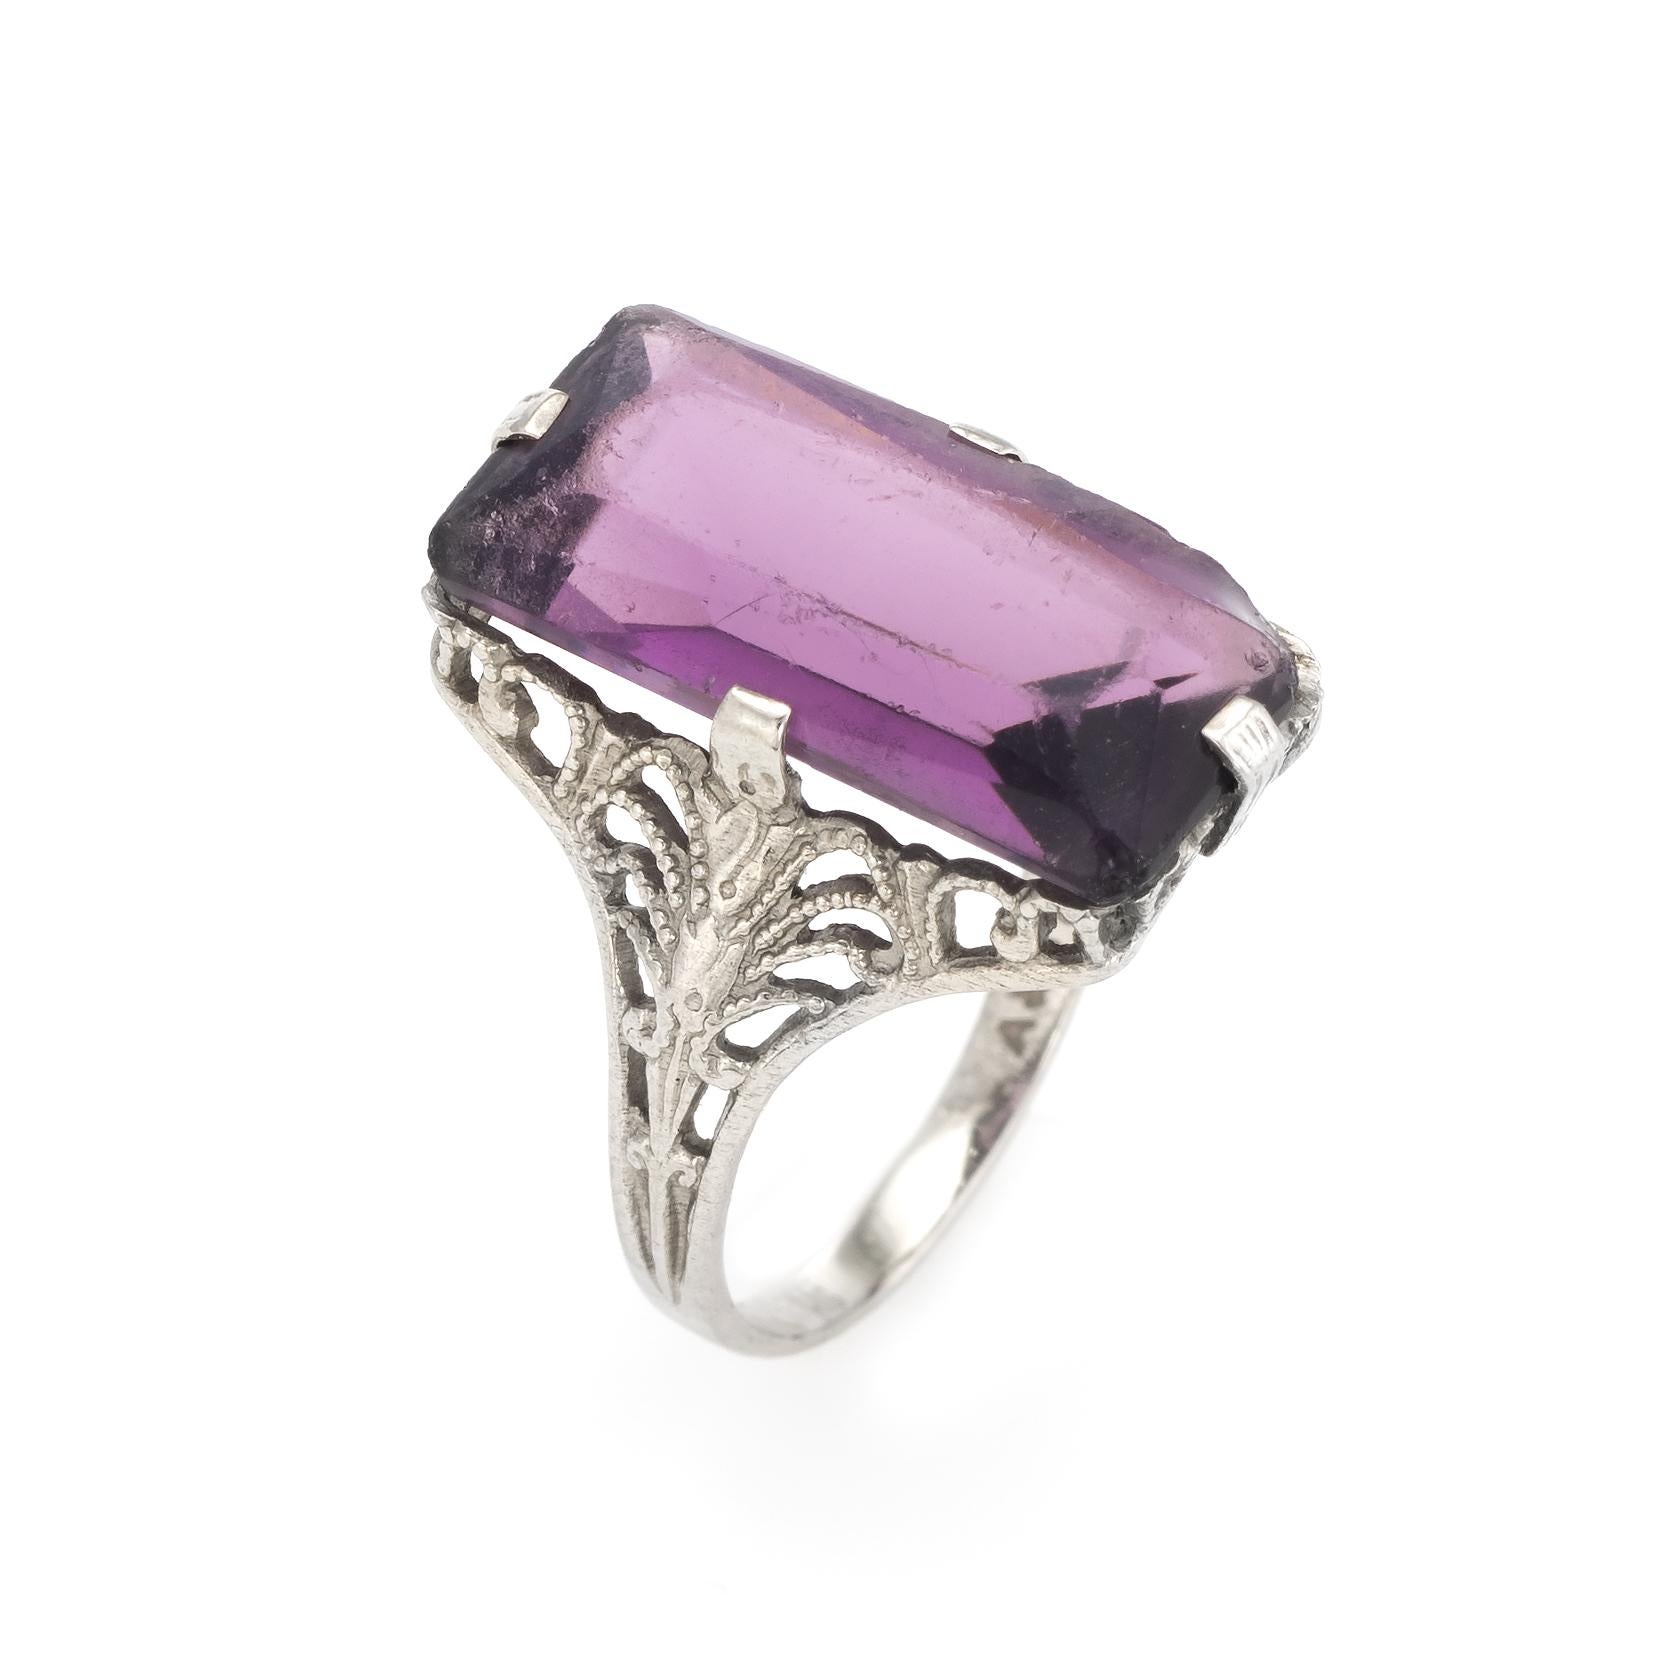 Finely detailed vintage Art Deco era cocktail ring (circa 1920s to 1930s), crafted in 10 karat white gold. 

Centrally mounted amethyst measures 15.75mm x 8mm (estimated at 5.50 carats). The amethyst is in good condition with wear evident (light